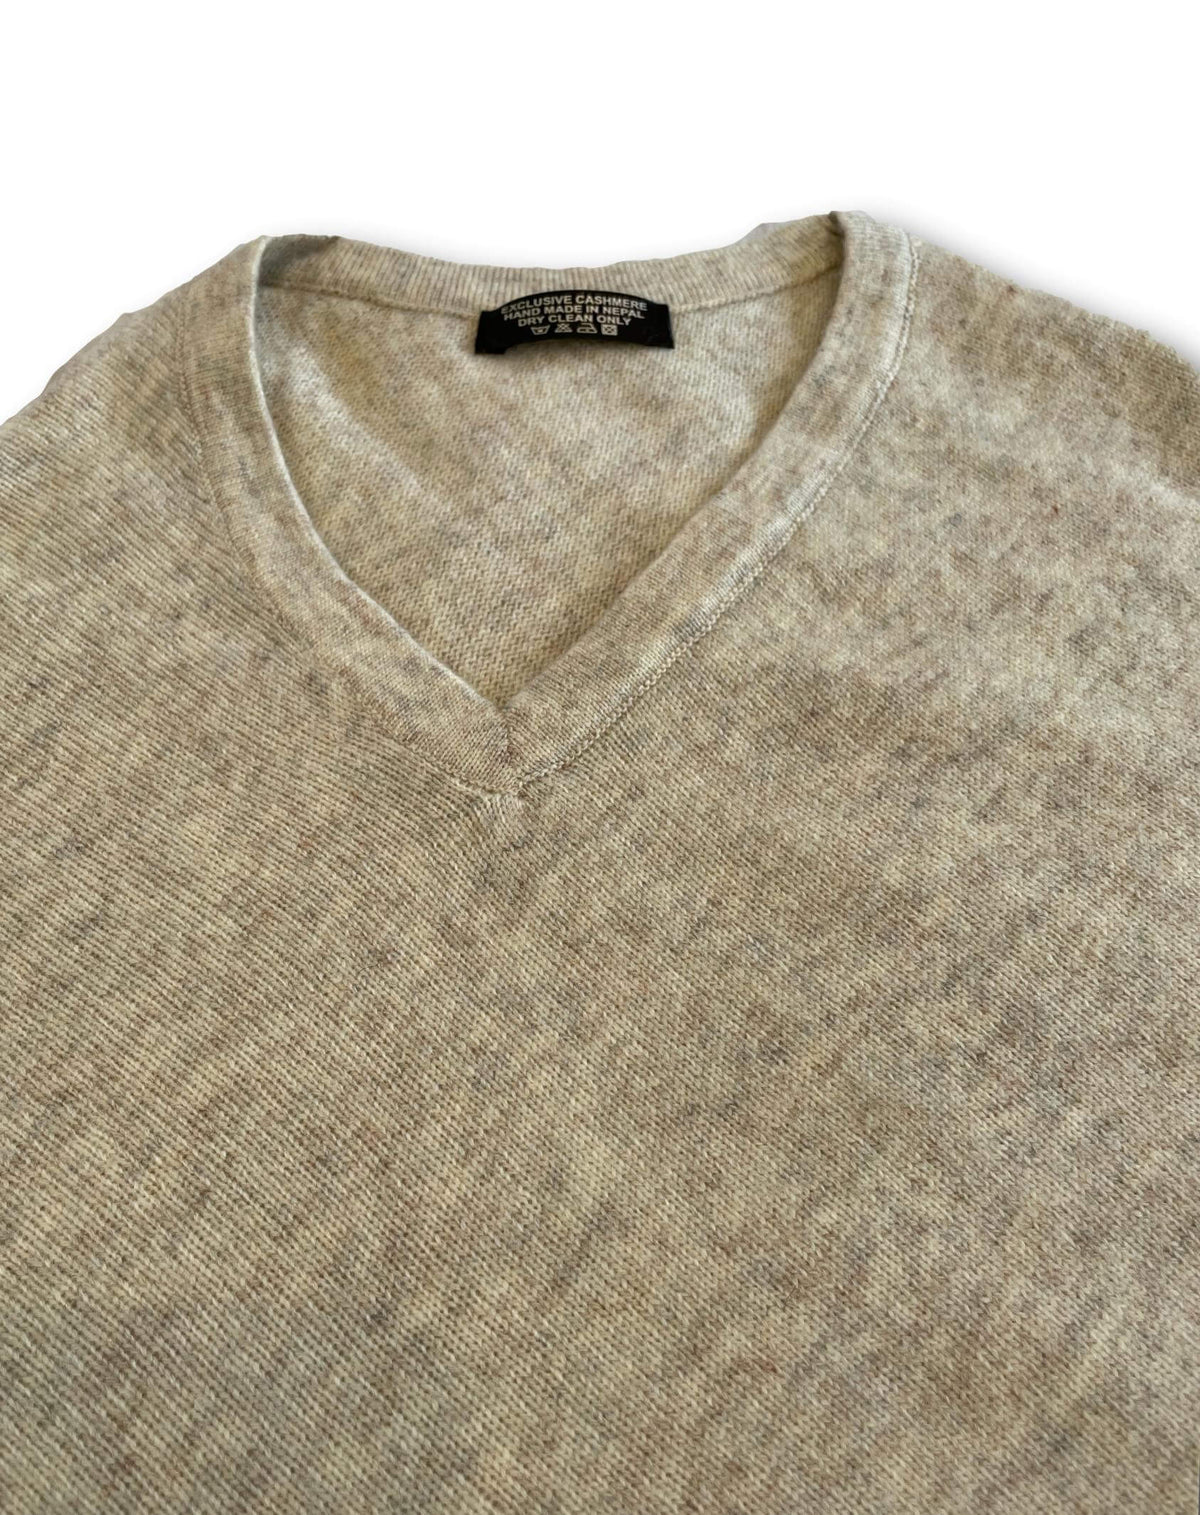 Cashmere Poncho - Handmade In Nepal 🇳🇵